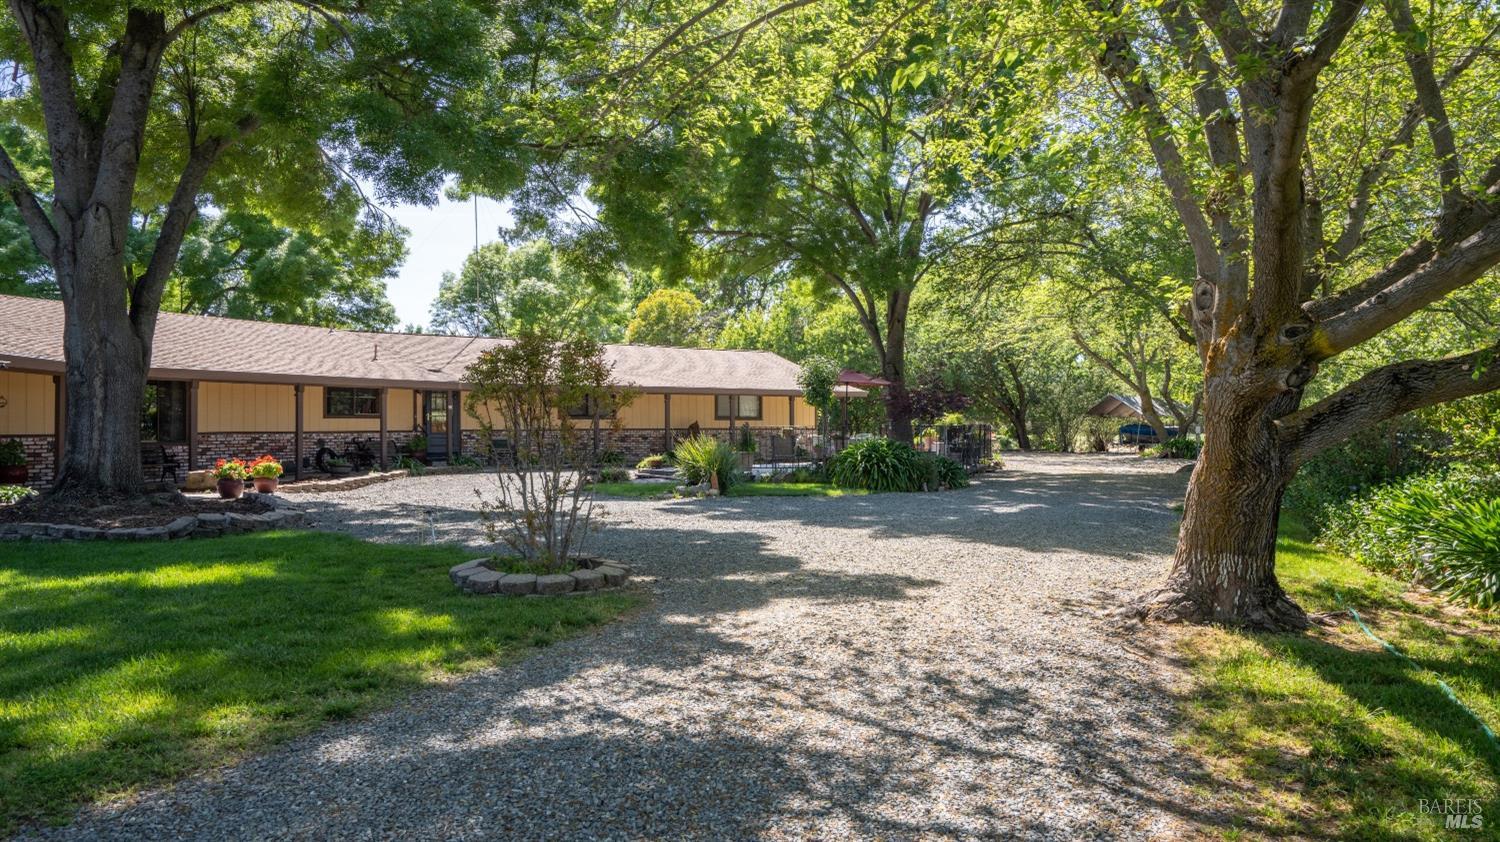 4384 Peaceful Glen Road, Vacaville, California, 95688, United States, 3 Bedrooms Bedrooms, ,3 BathroomsBathrooms,Residential,For Sale,4384 Peaceful Glen Road,1504451